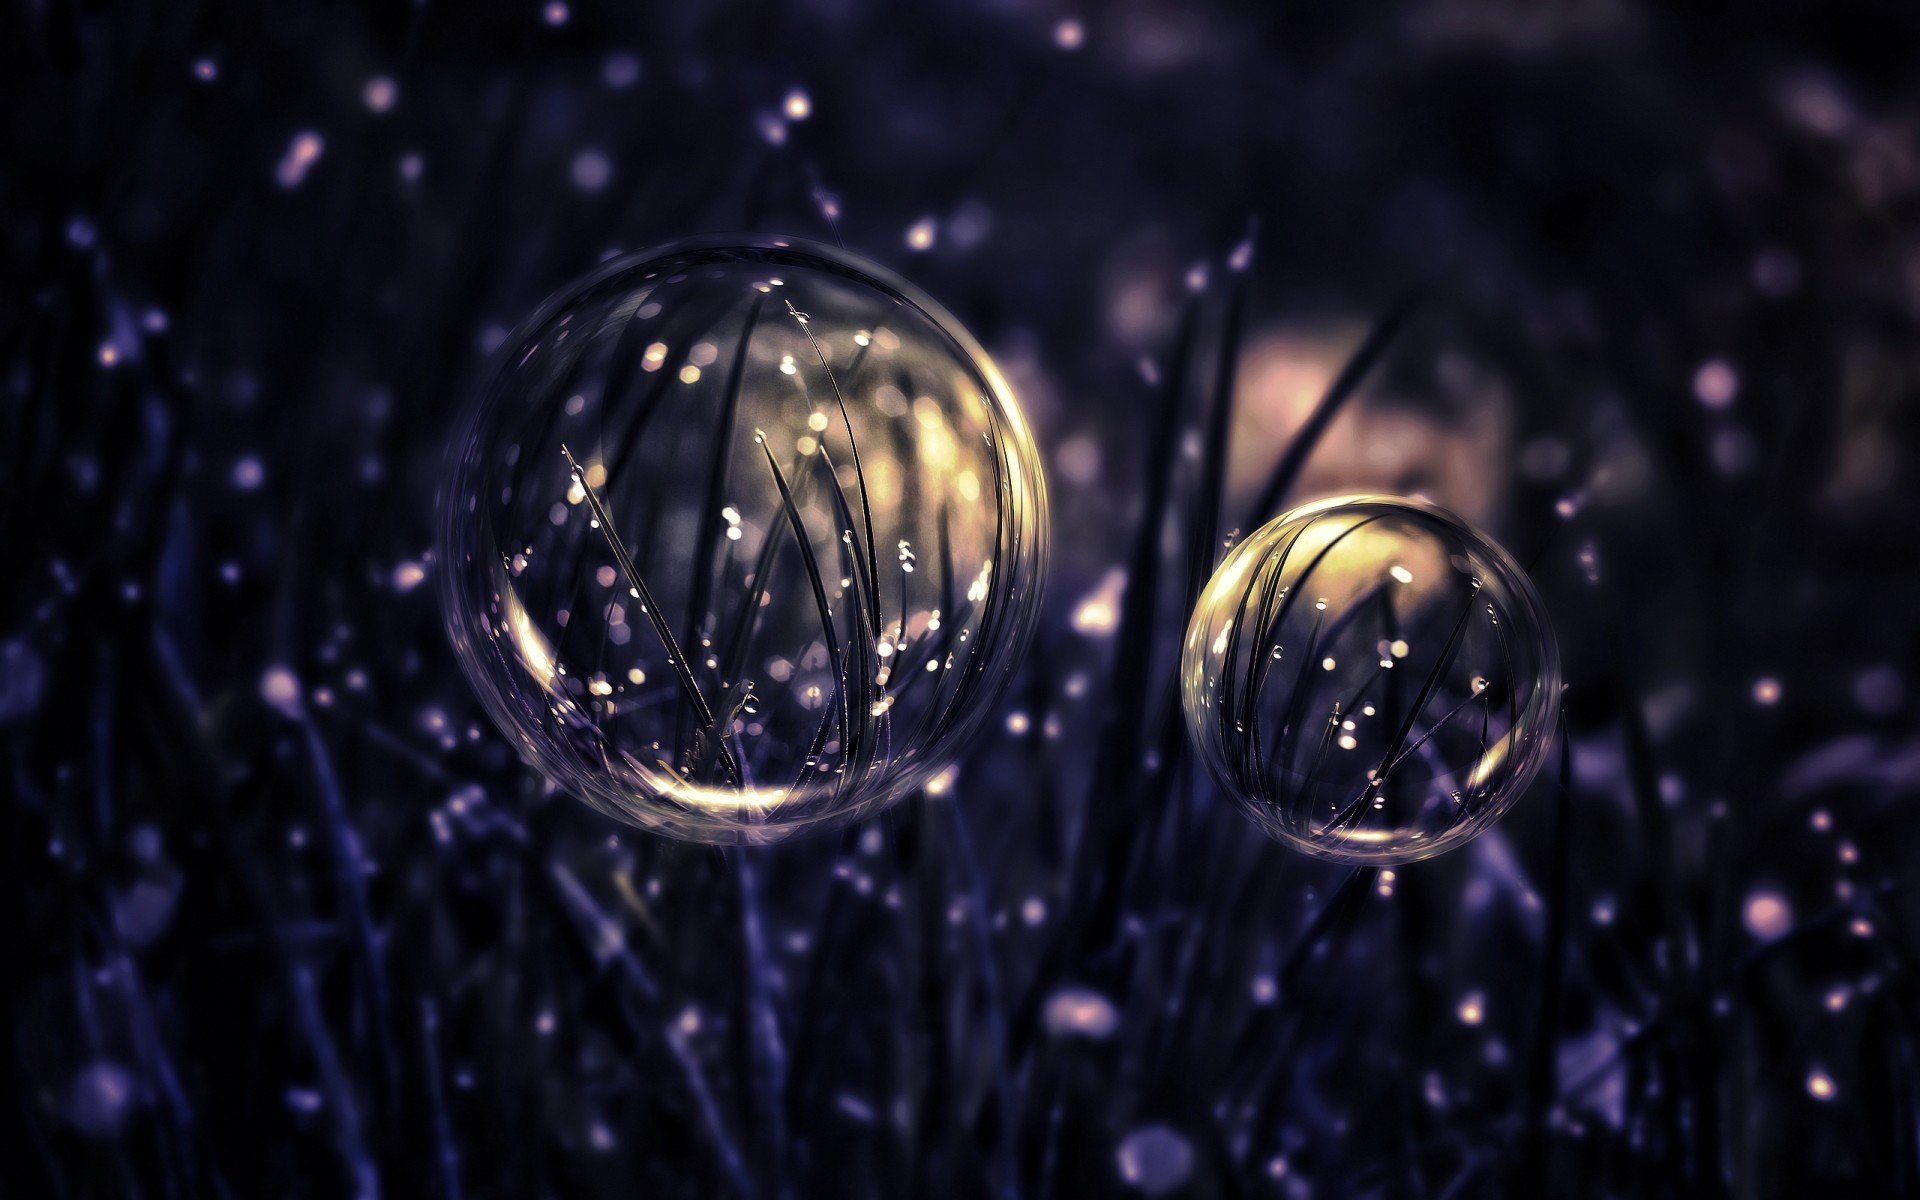 Bubbles 4K wallpaper for your desktop or mobile screen free and easy to download